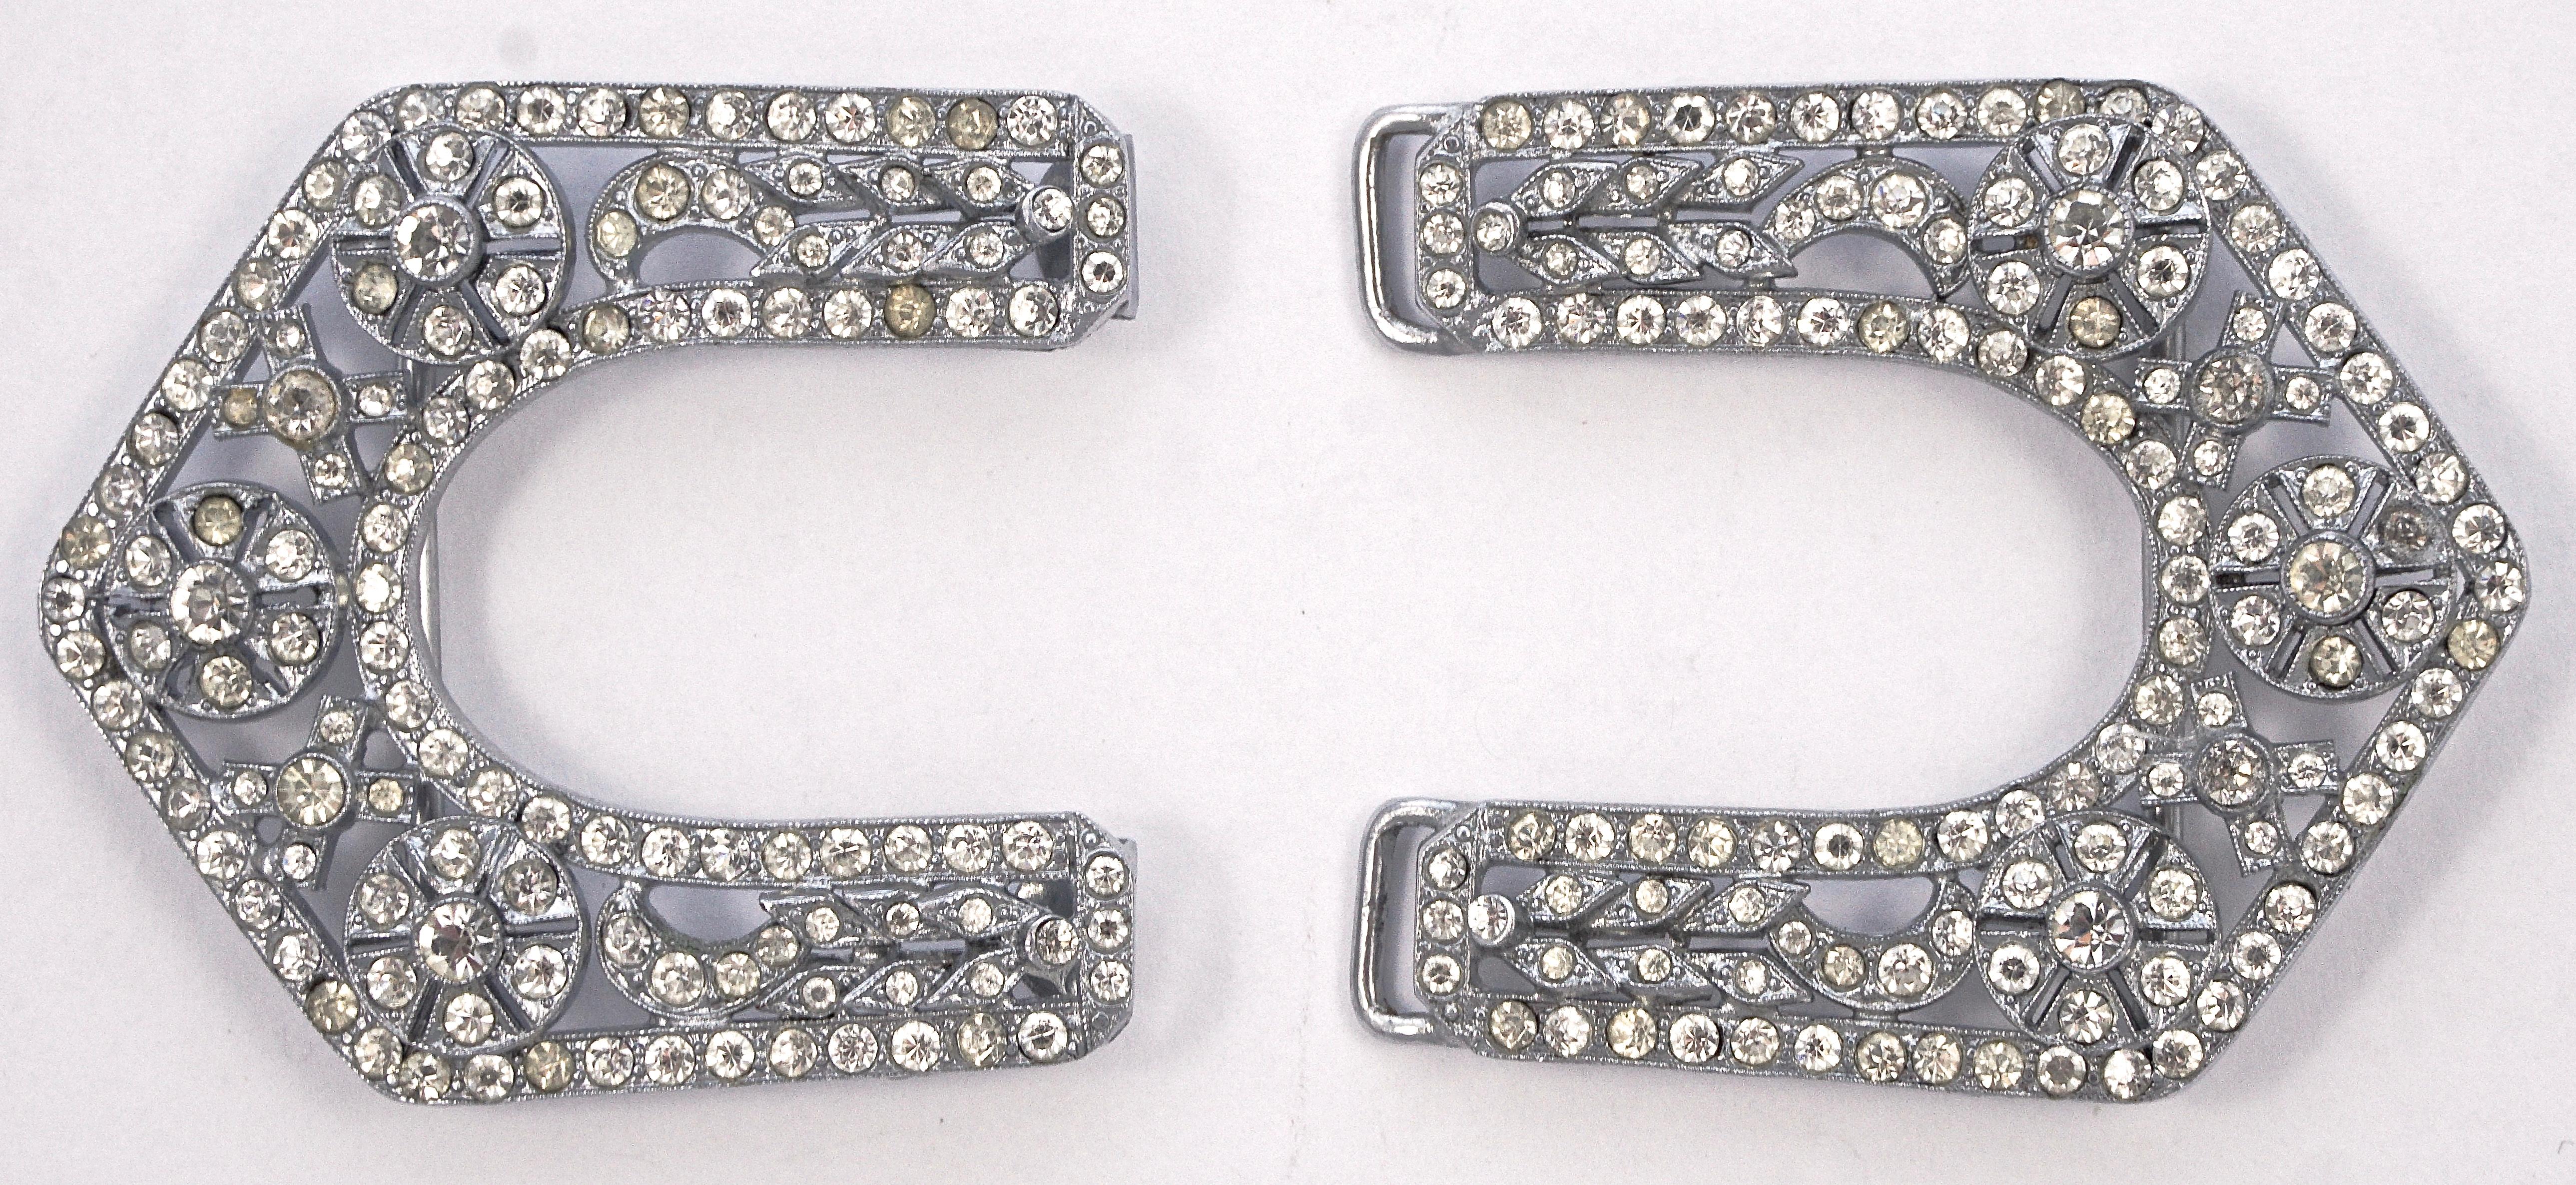 Women's or Men's Large Art Deco Silver Tone and Rhinestone Belt Buckle For Sale